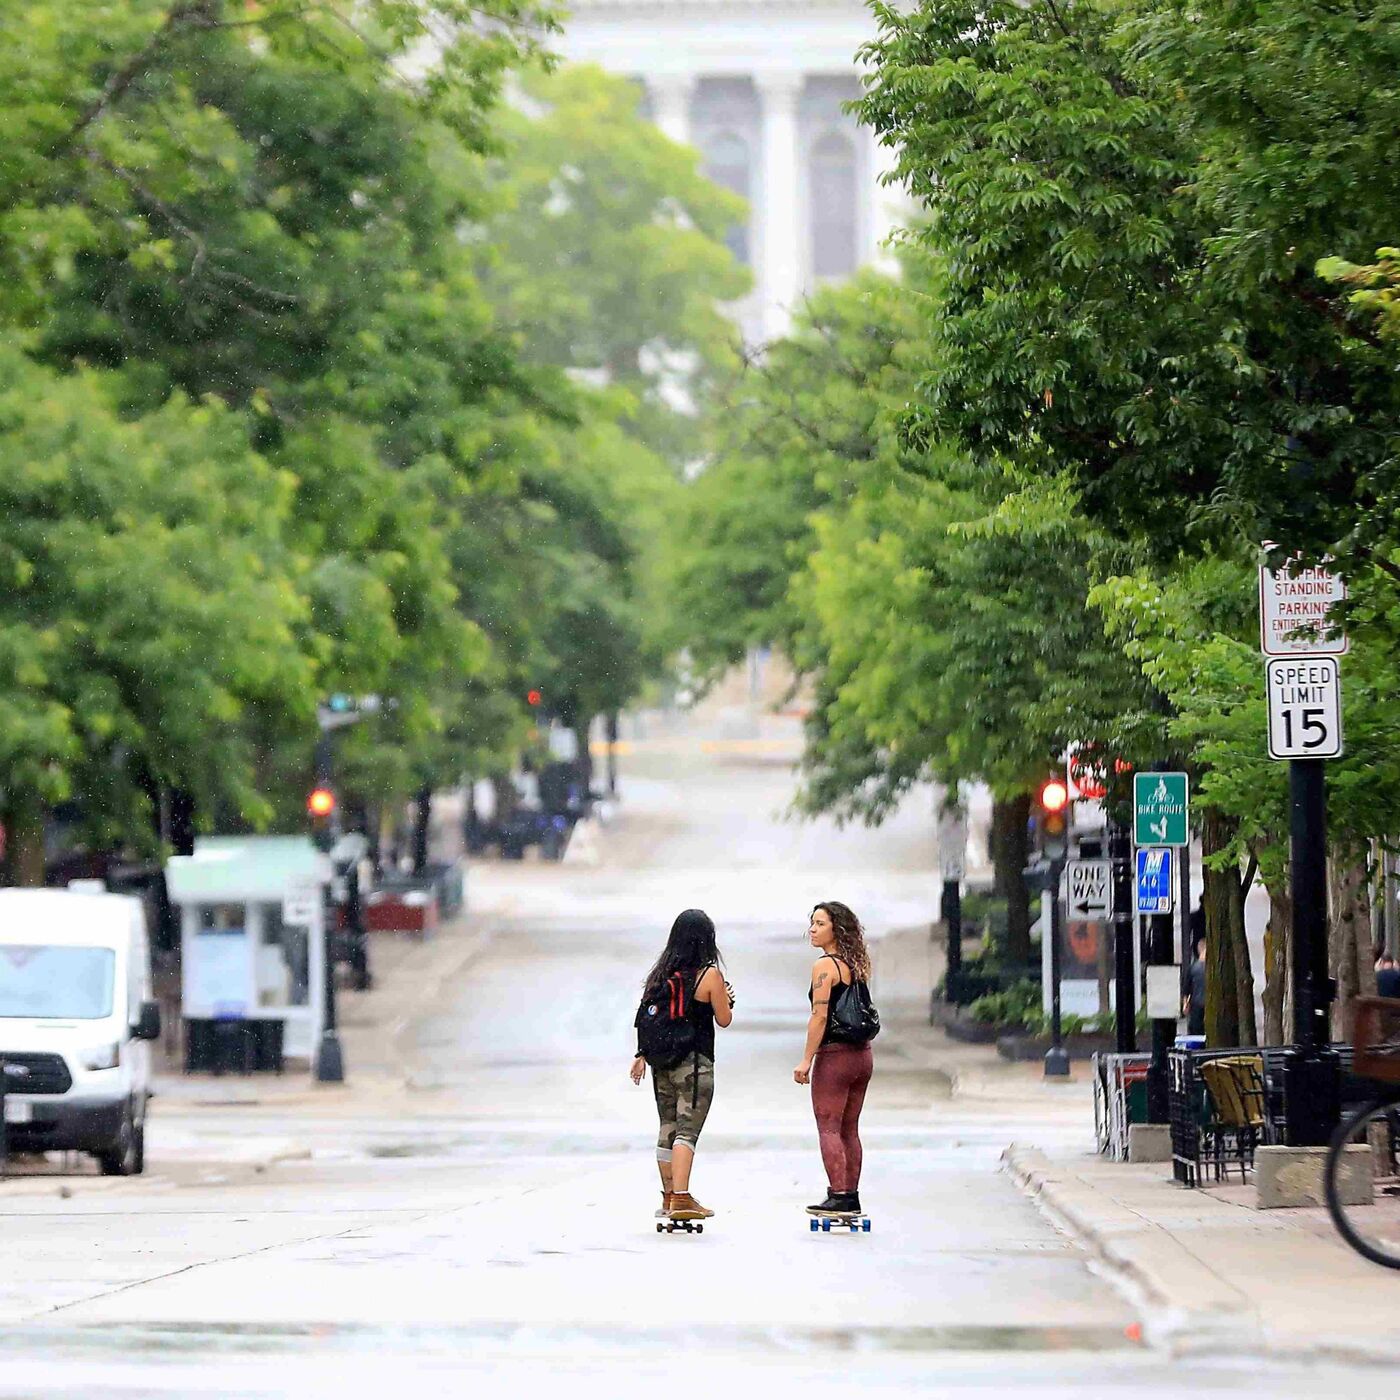 Yoga in the middle of State Street? That's just one idea for a pedestrian mall in the heart of Madison this summer